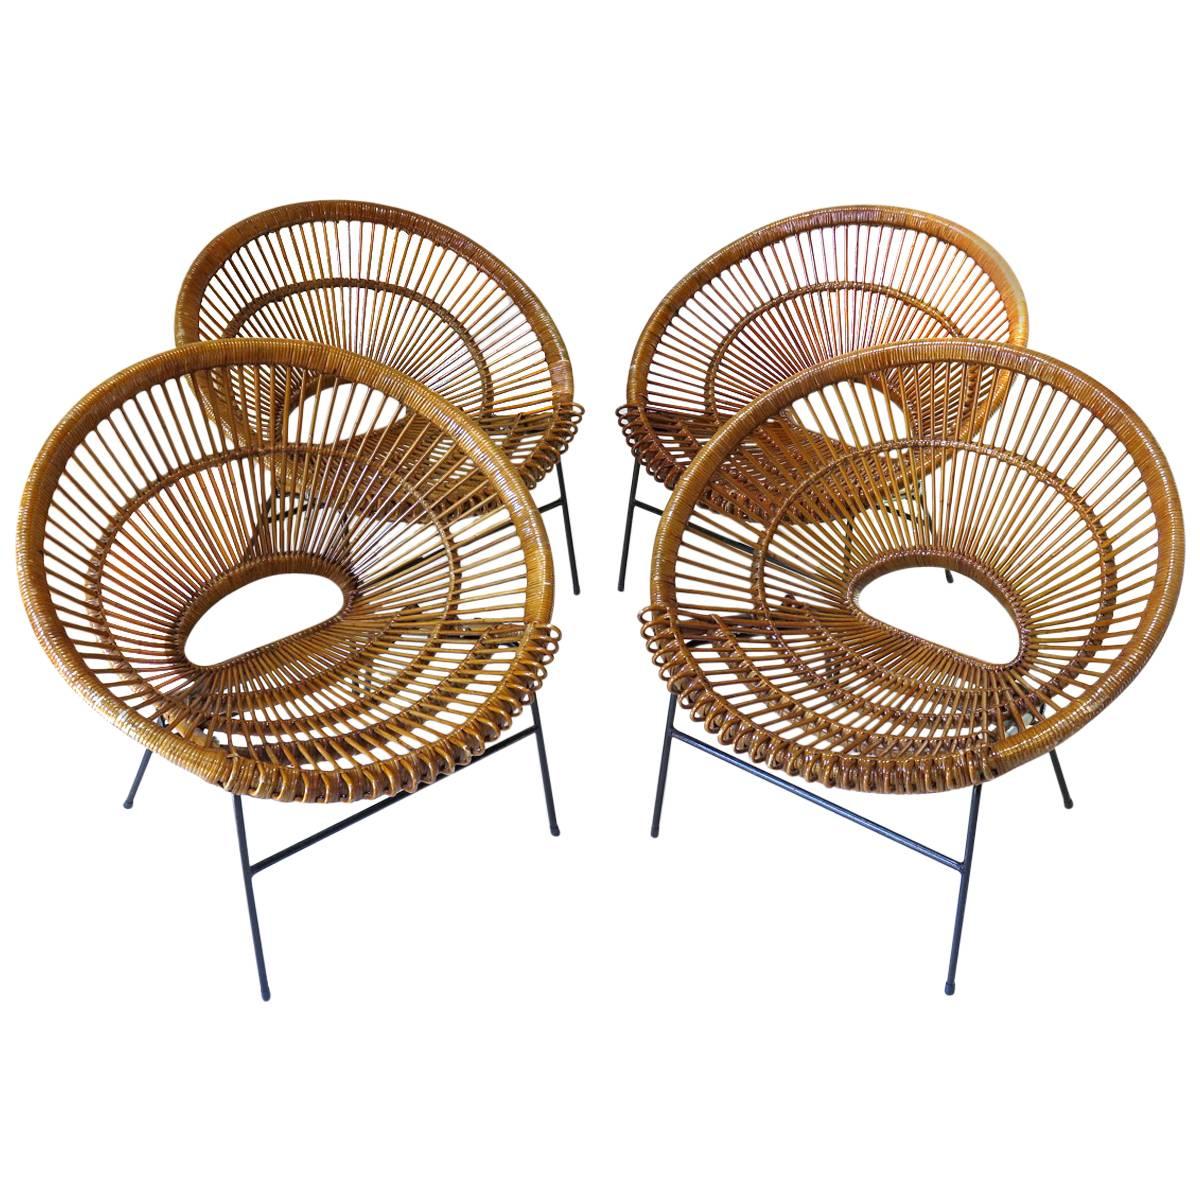 Four Lounge Chairs Attributed to Janine Abraham & Dirk Jan Rol, France, 1960s